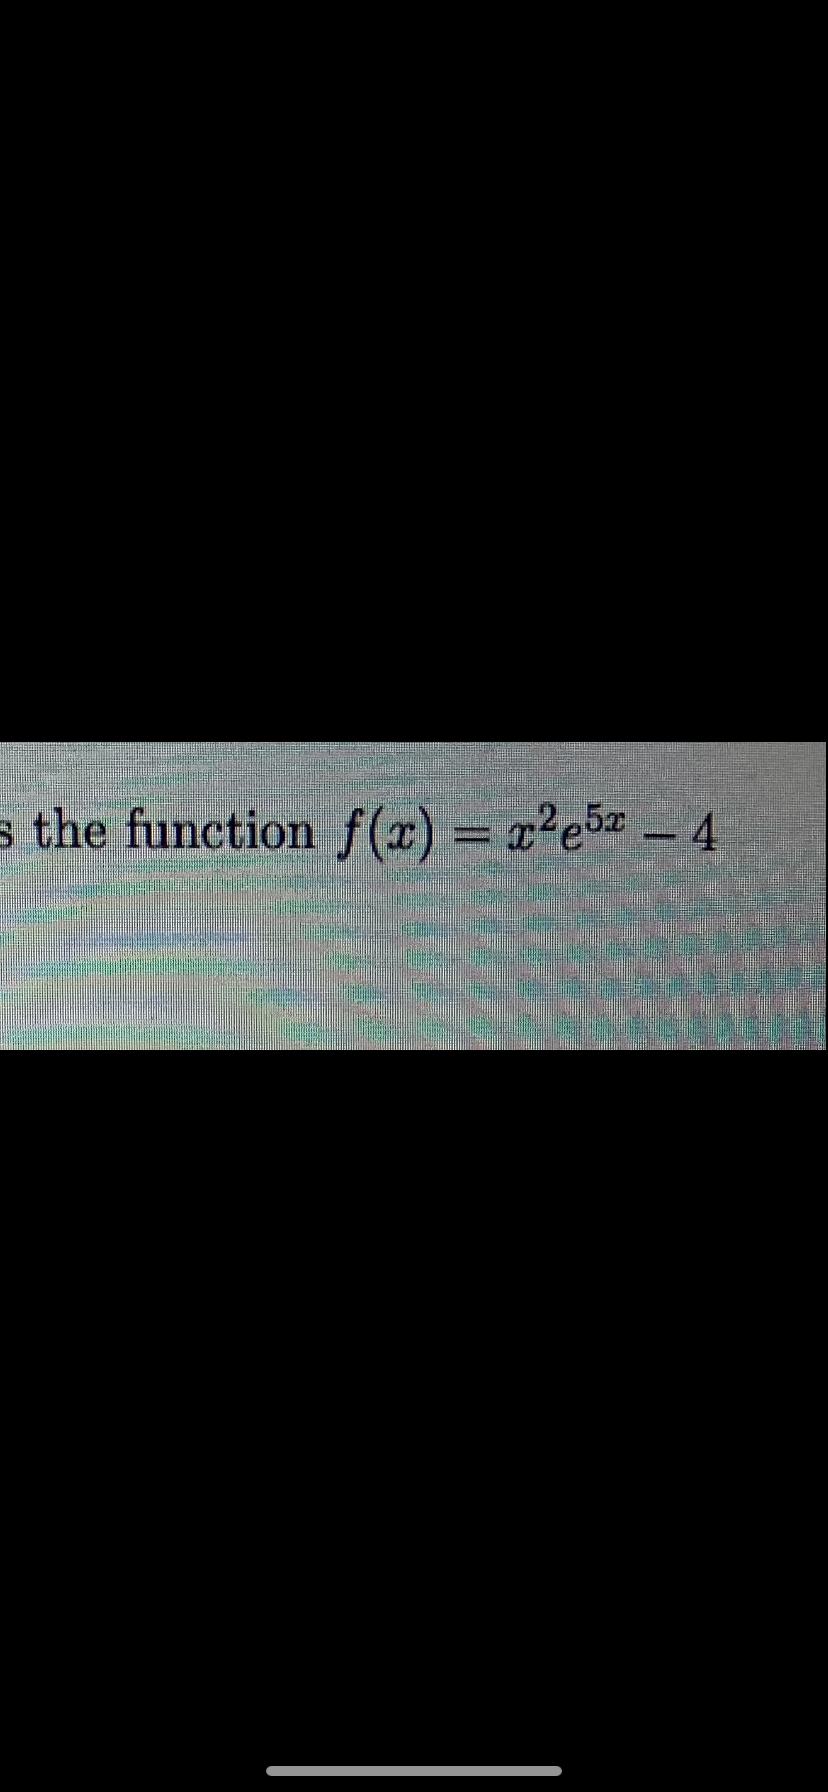 s the function f(r) = c²e - 4
